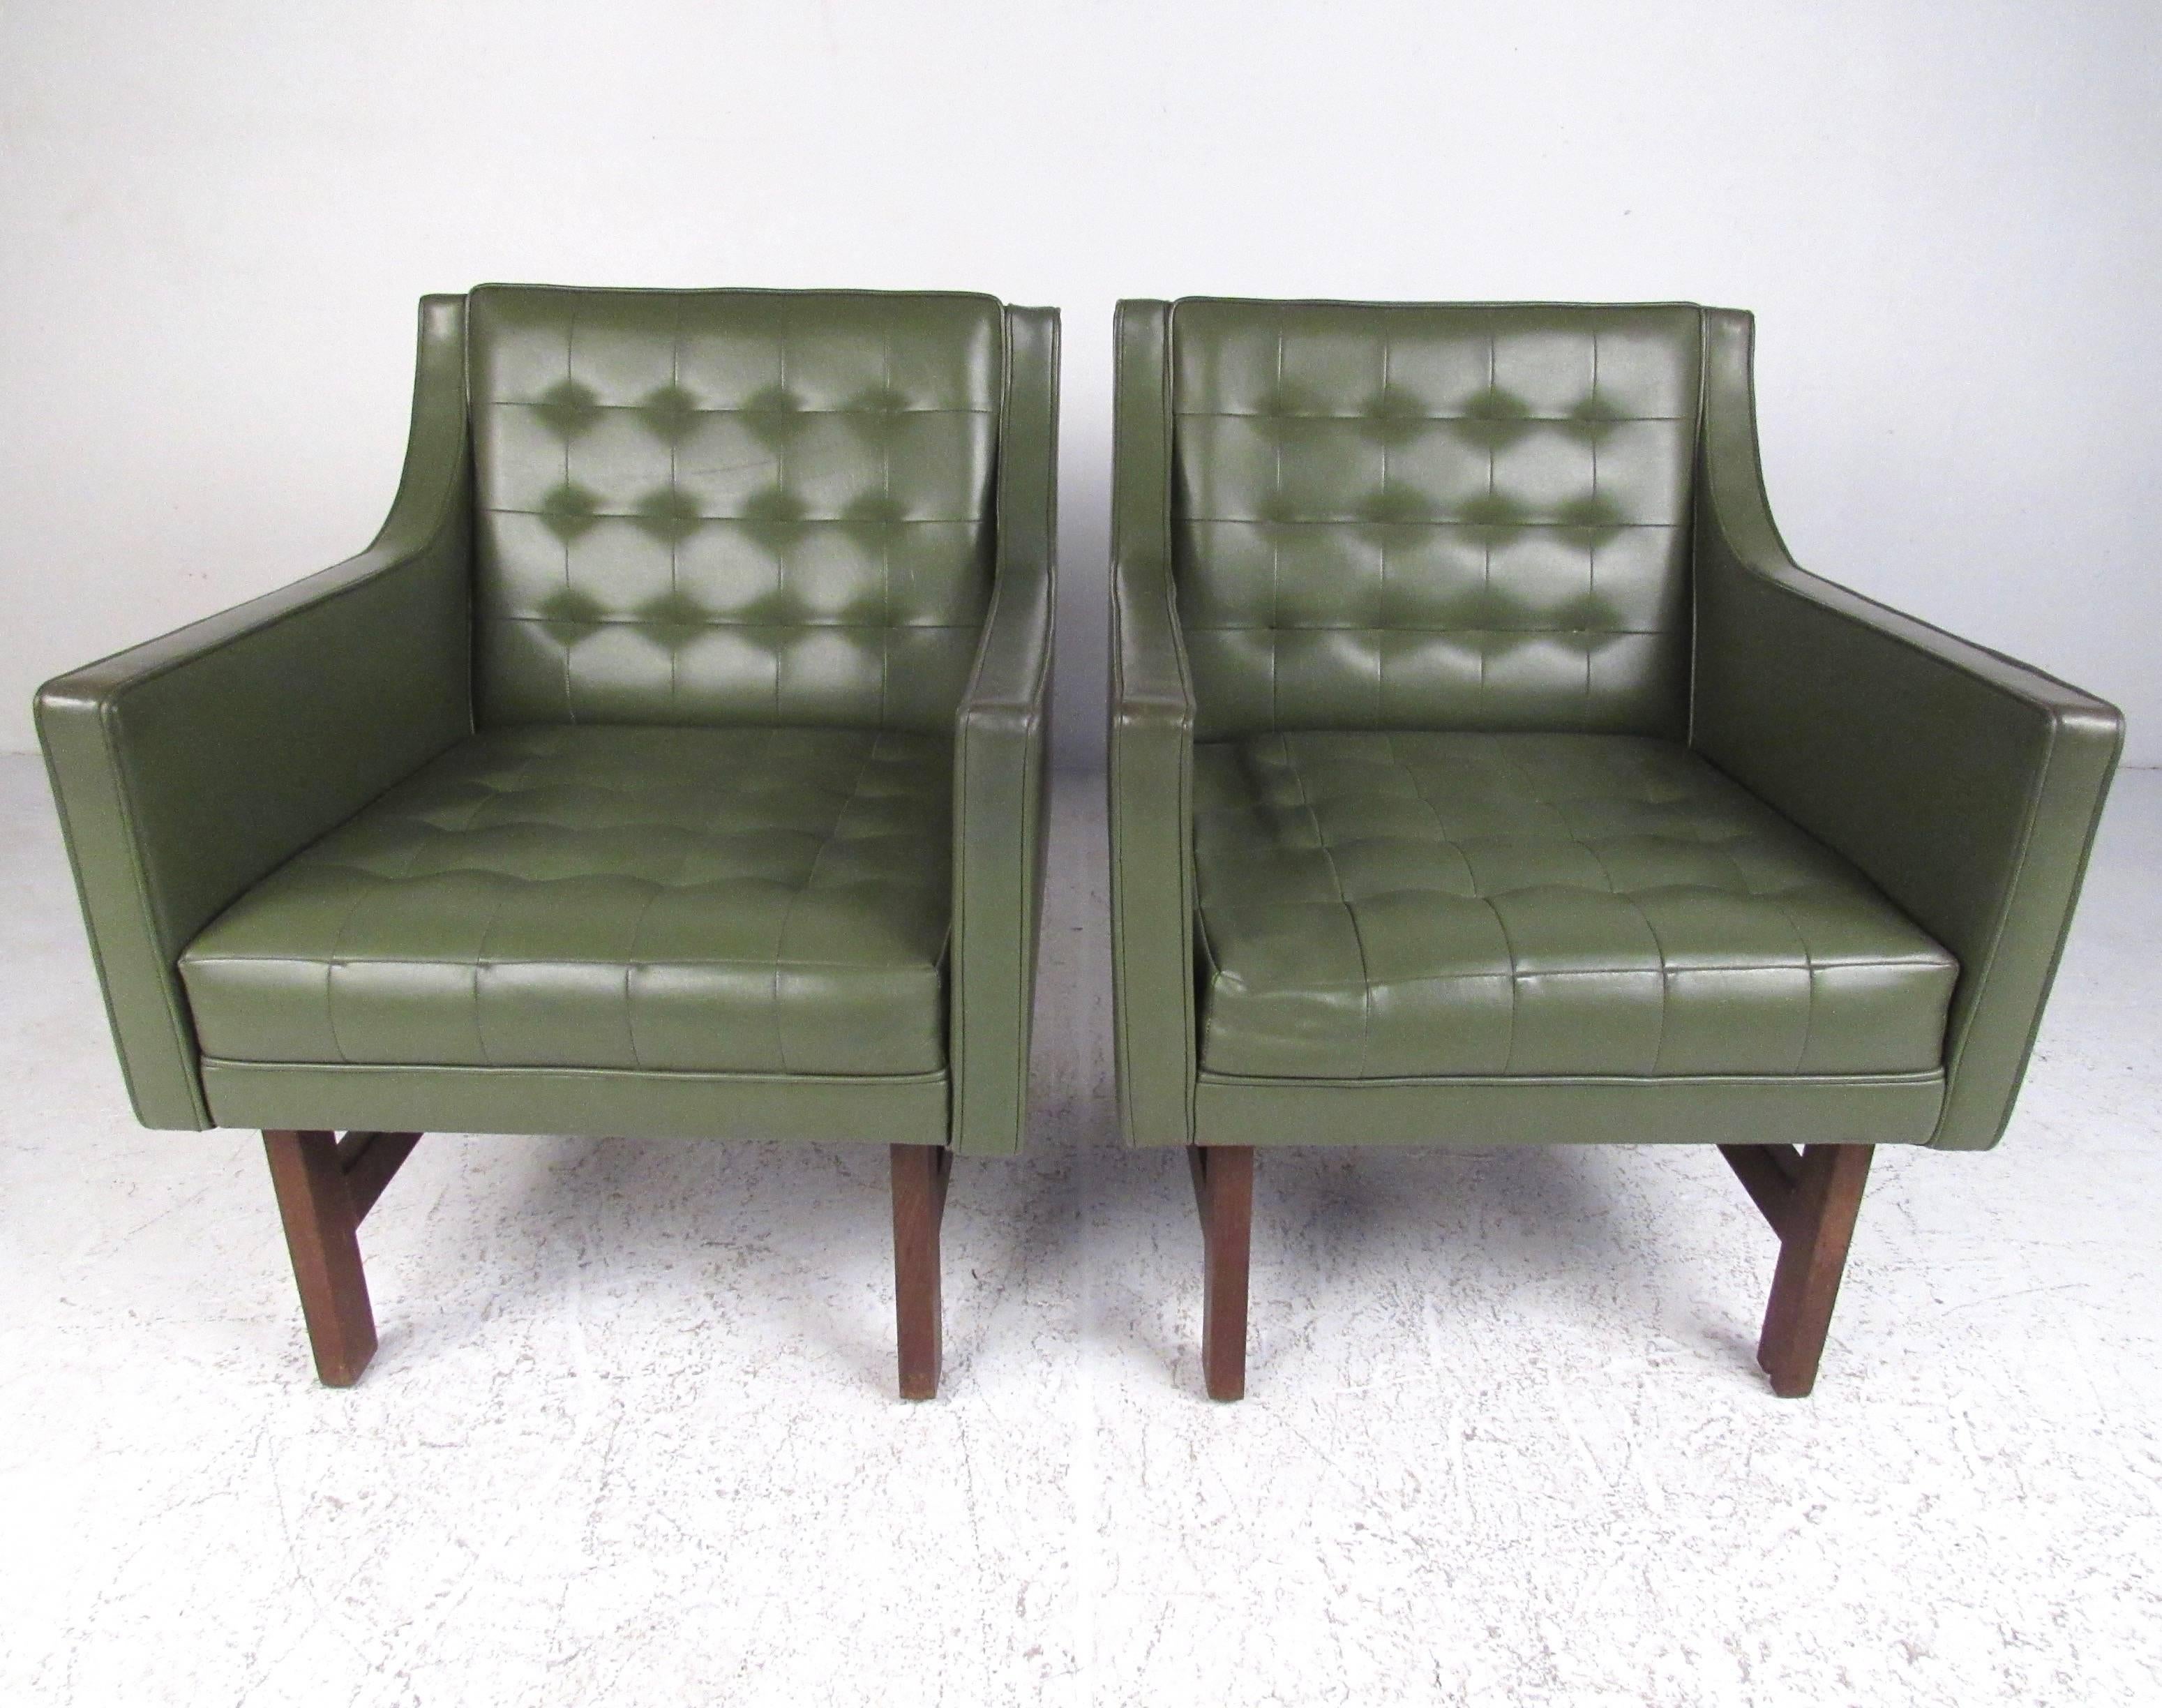 This pair of vintage vinyl club chairs feature stylish sloped armrests, tufted seat backs, and teak frames. Mid-Century Modern design makes these a memorable addition to any interior, unique seating for home or business. Please confirm item location